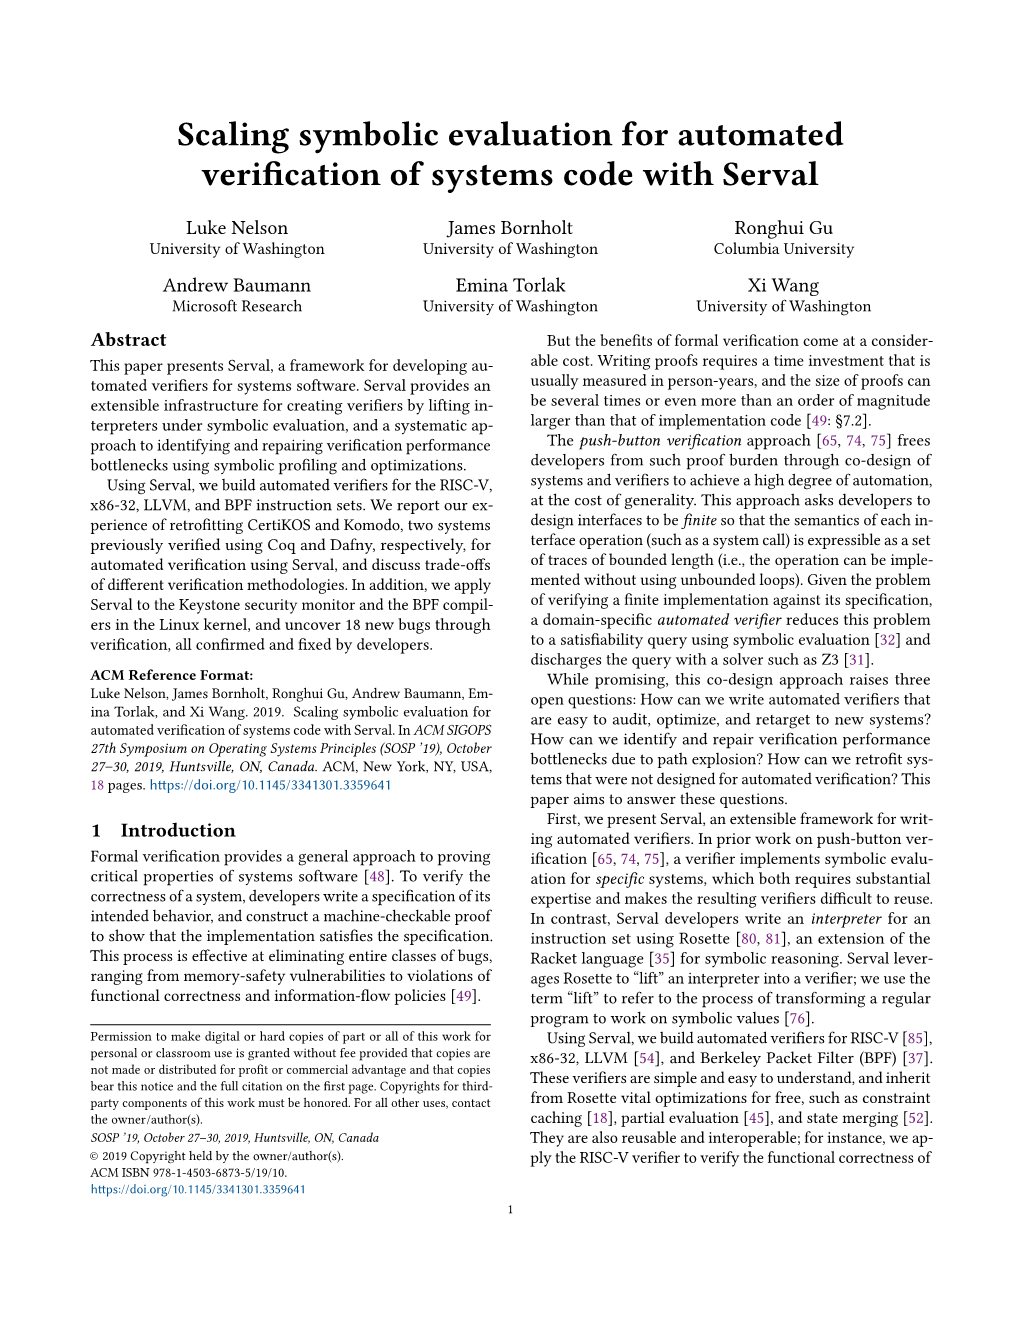 Scaling Symbolic Evaluation for Automated Verification of Systems Code with Serval